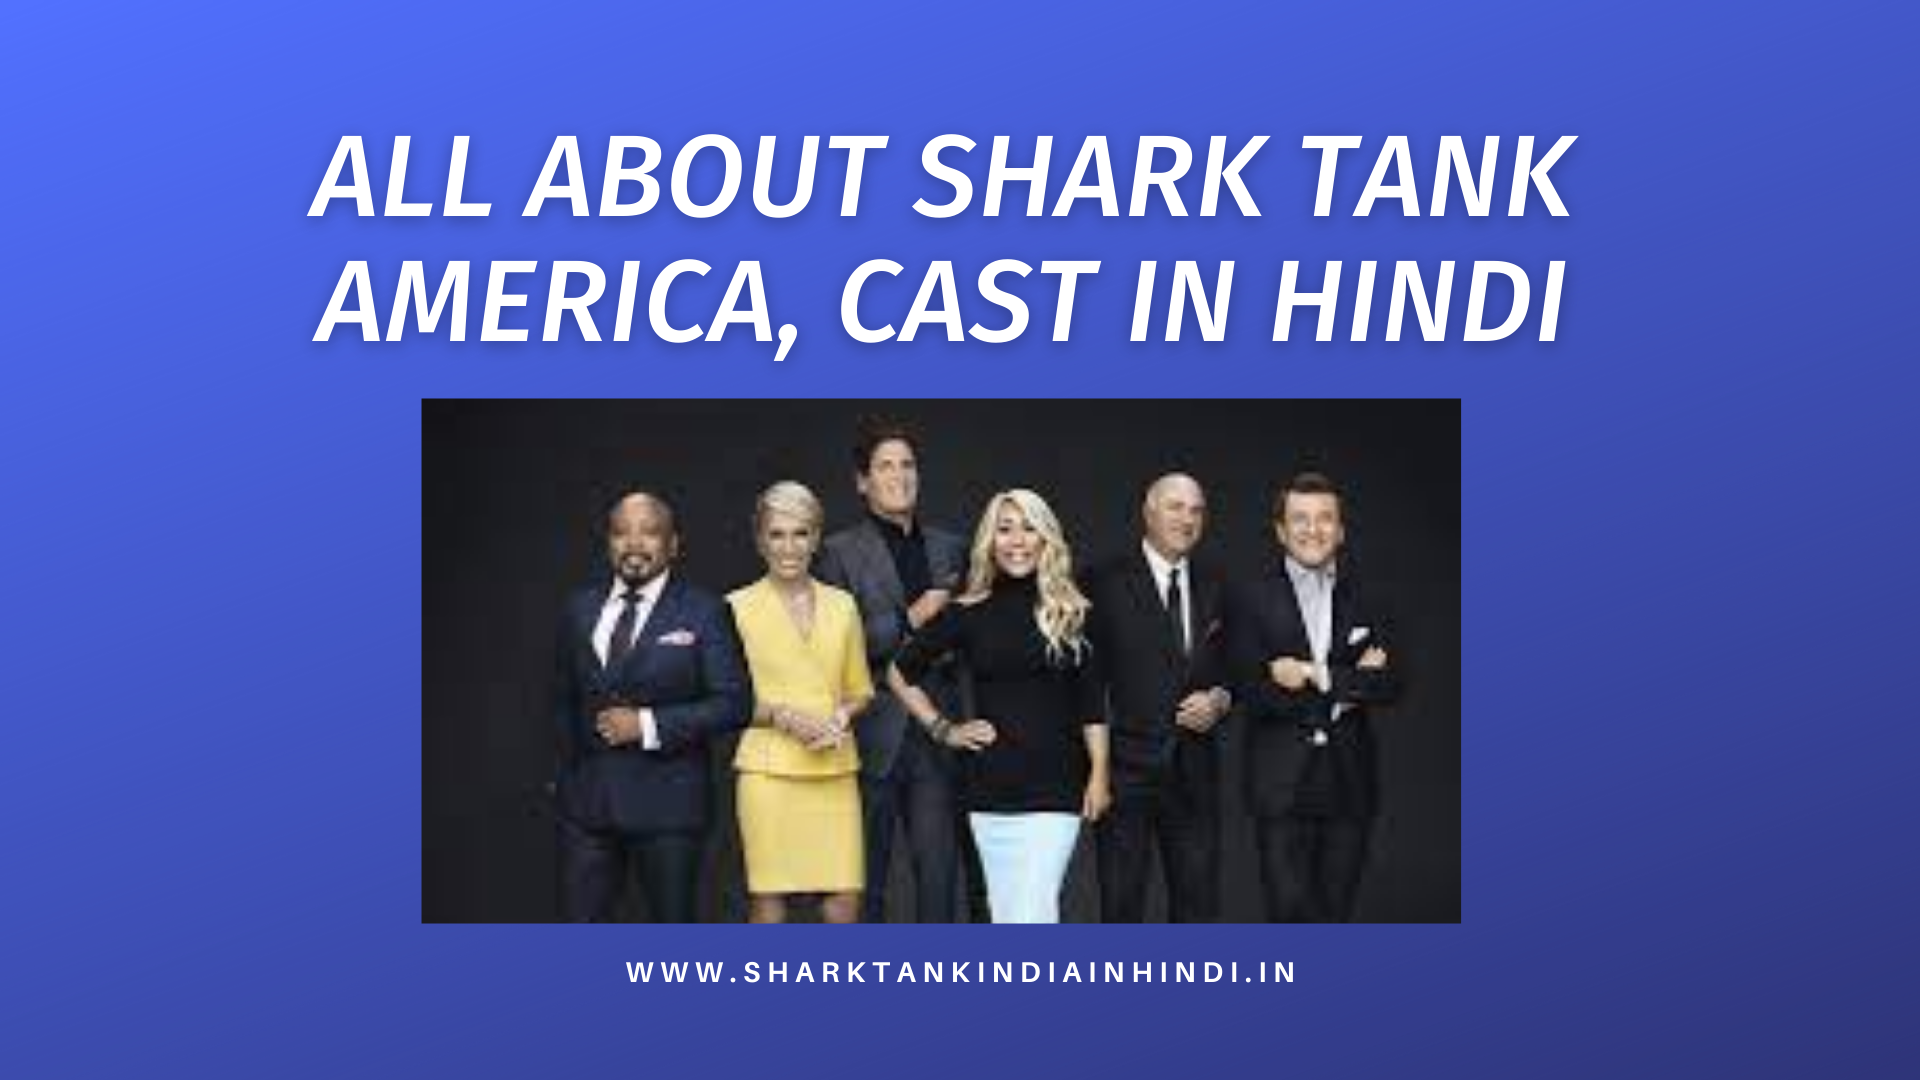 All About Shark Tank America, Cast In Hindi